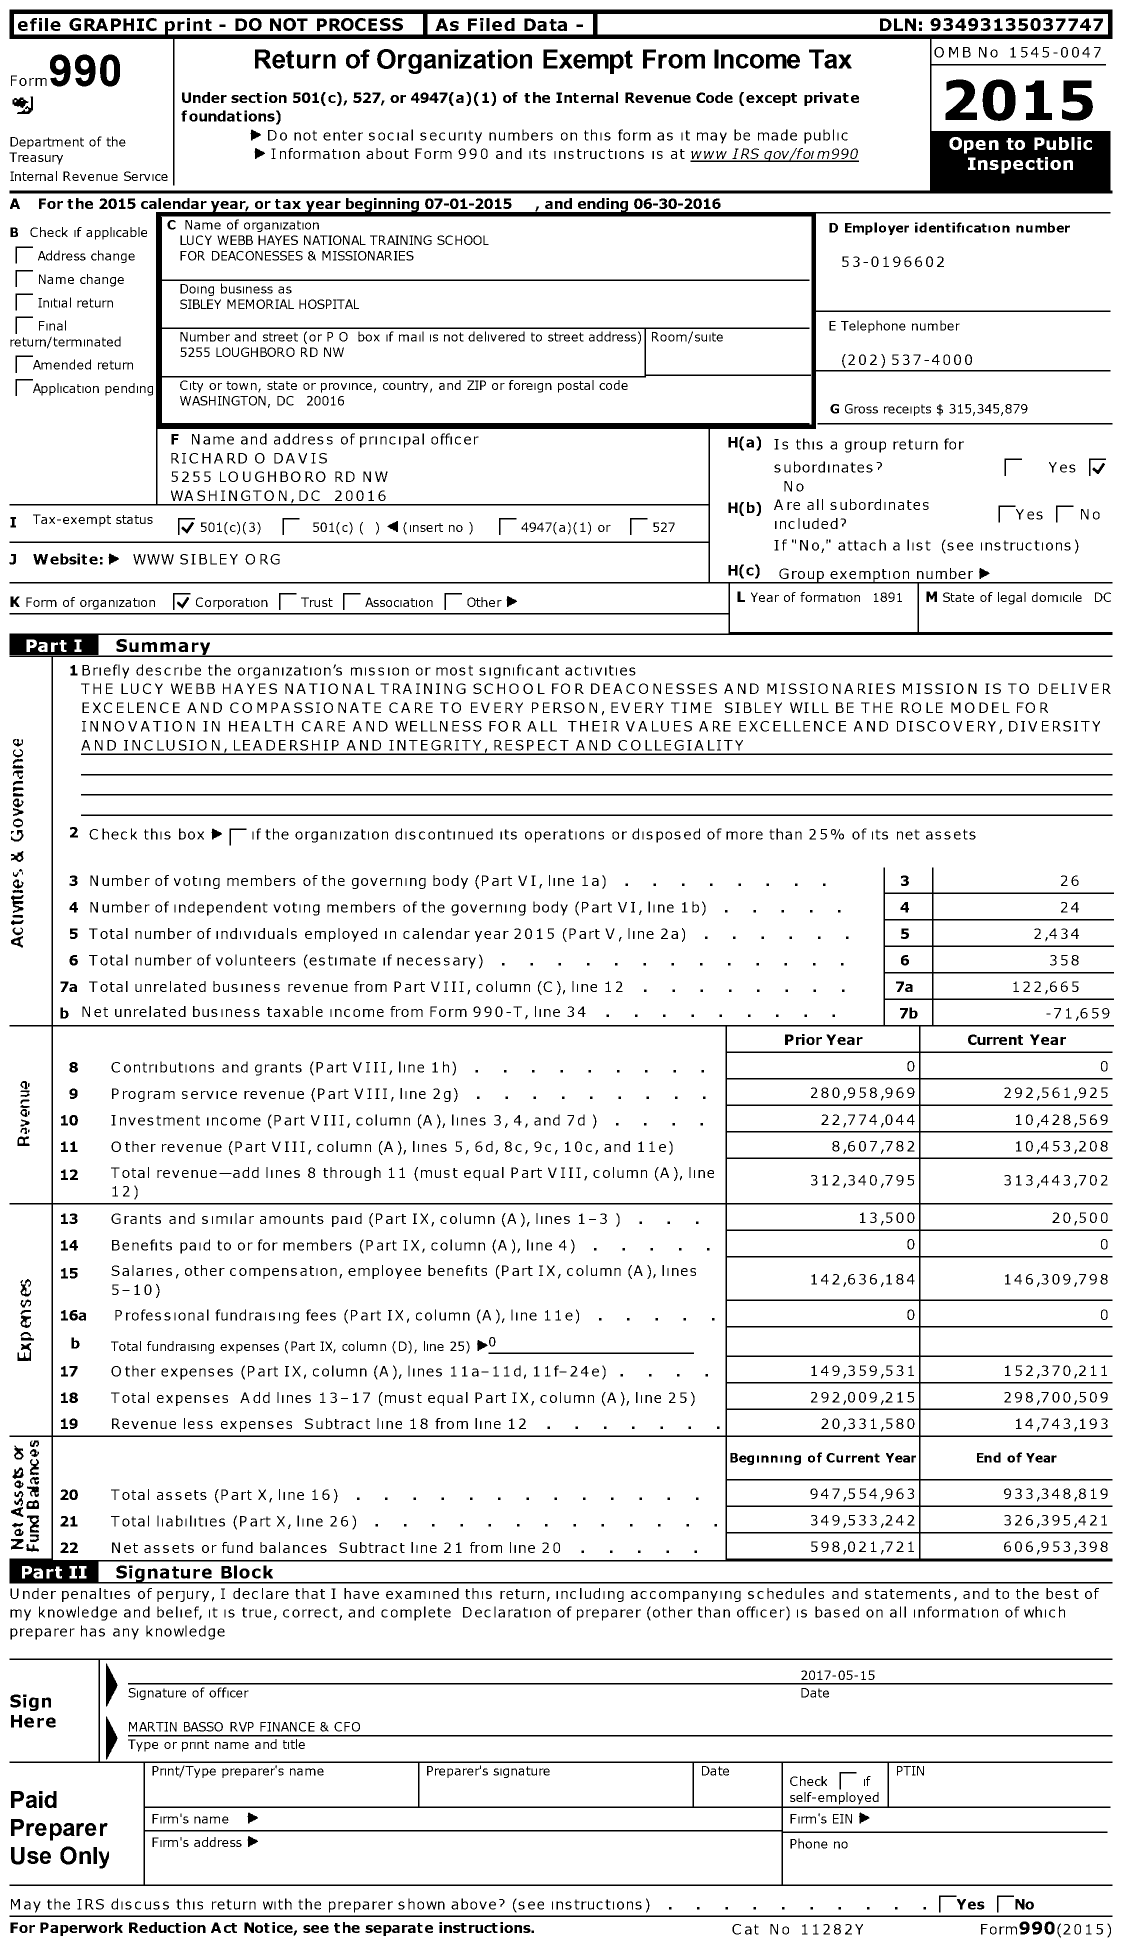 Image of first page of 2015 Form 990 for Sibley Memorial Hospital (SMH)